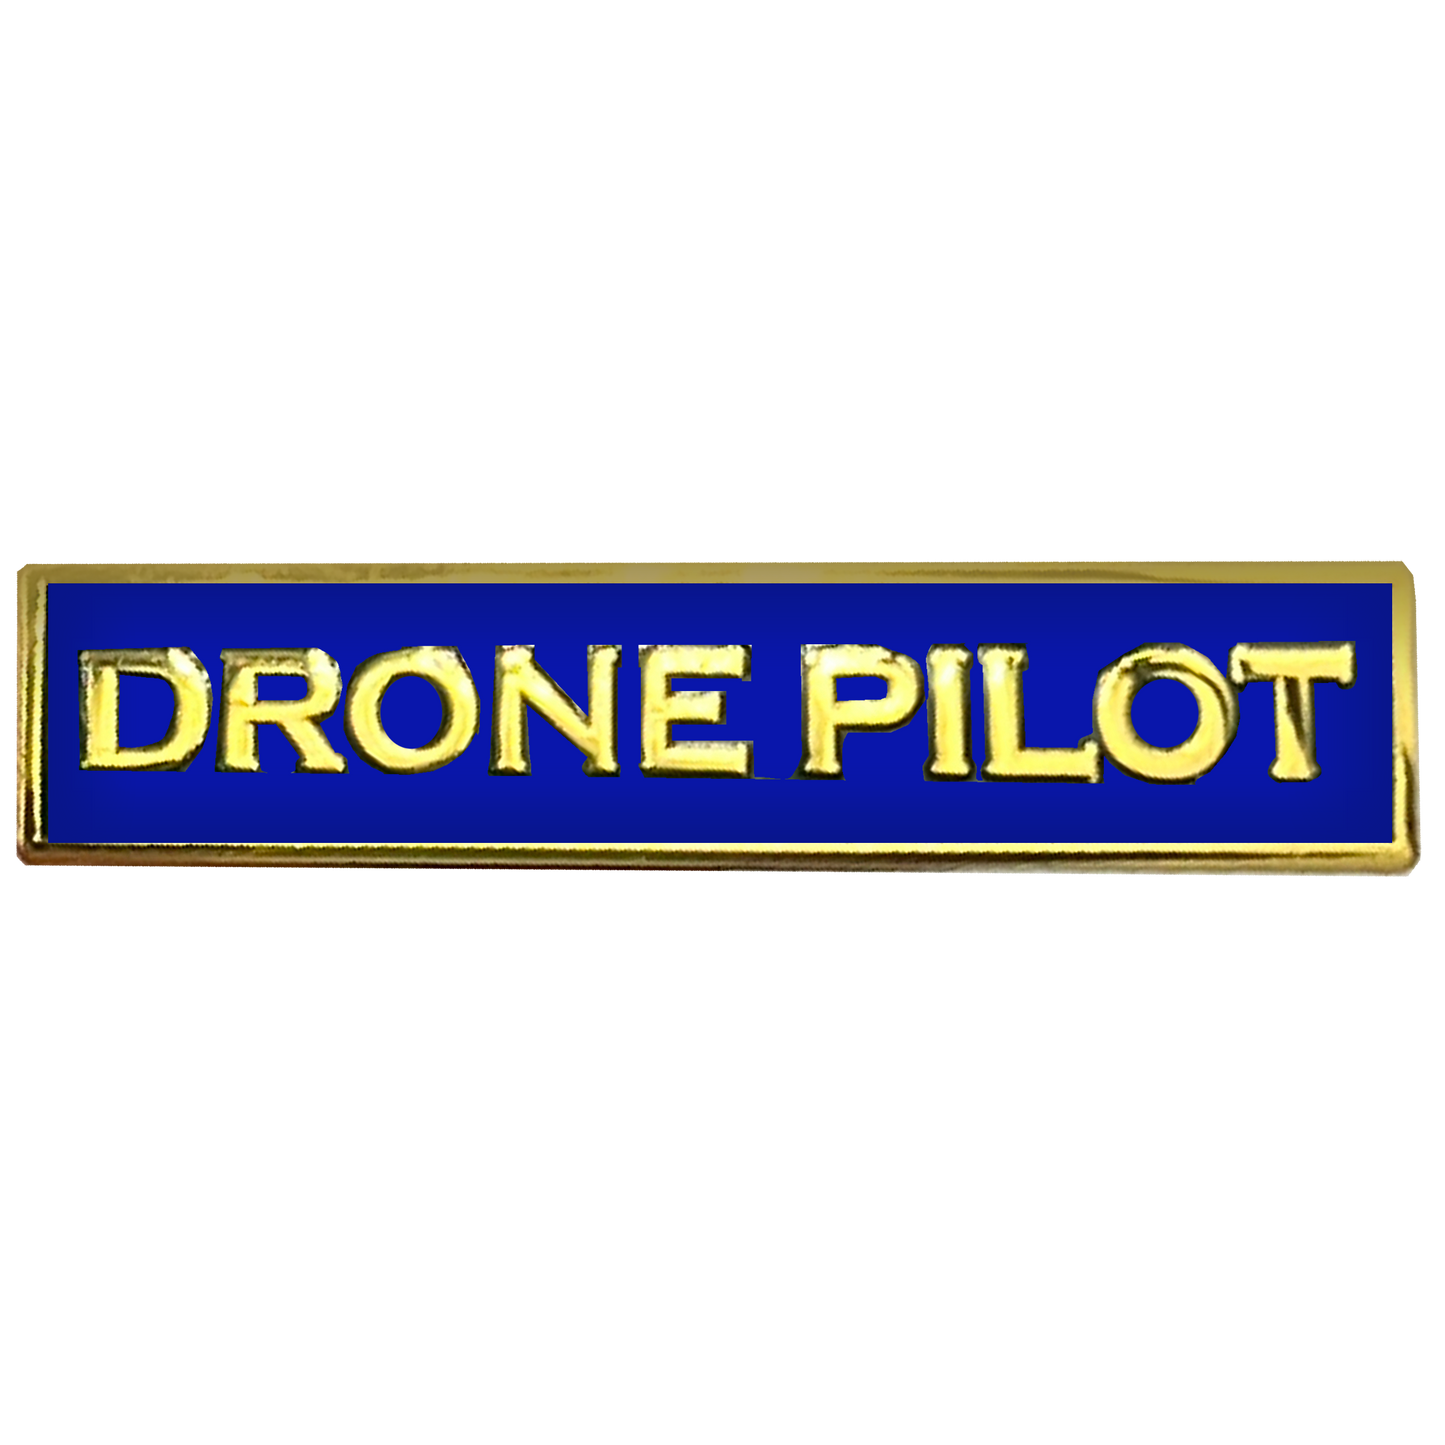 PBX-003-H DRONE PILOT Blue Commendation Bar Pin Police Government Realtor Commercial FAA